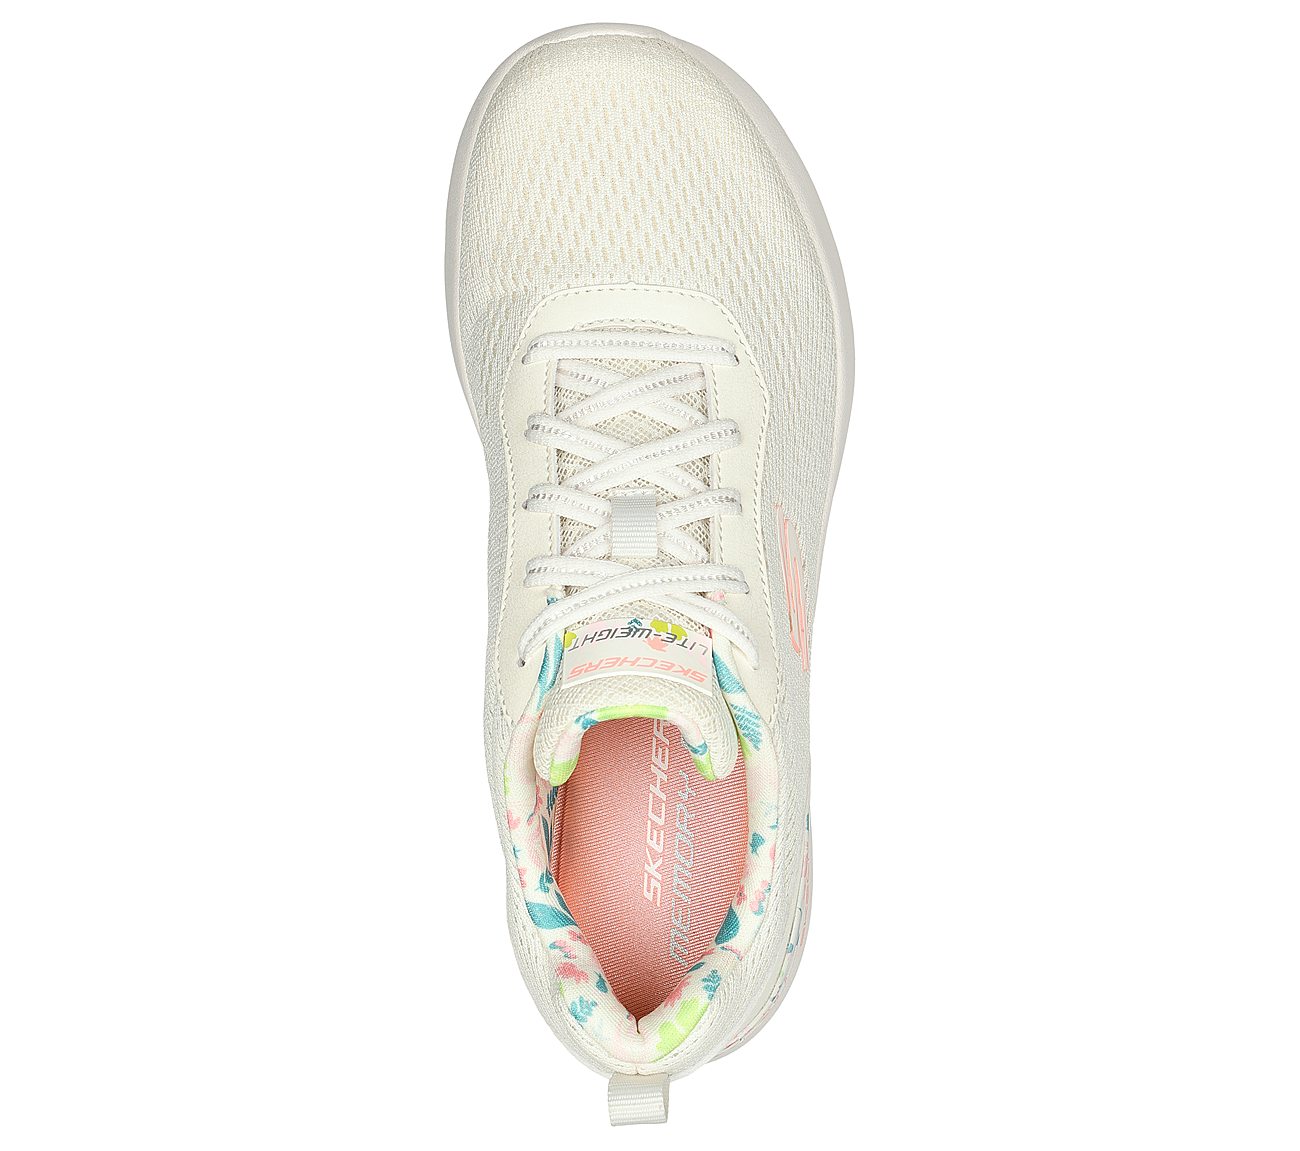 SKECH-AIR DYNAMIGHT-LAID OUT, OFF WHITE Footwear Top View